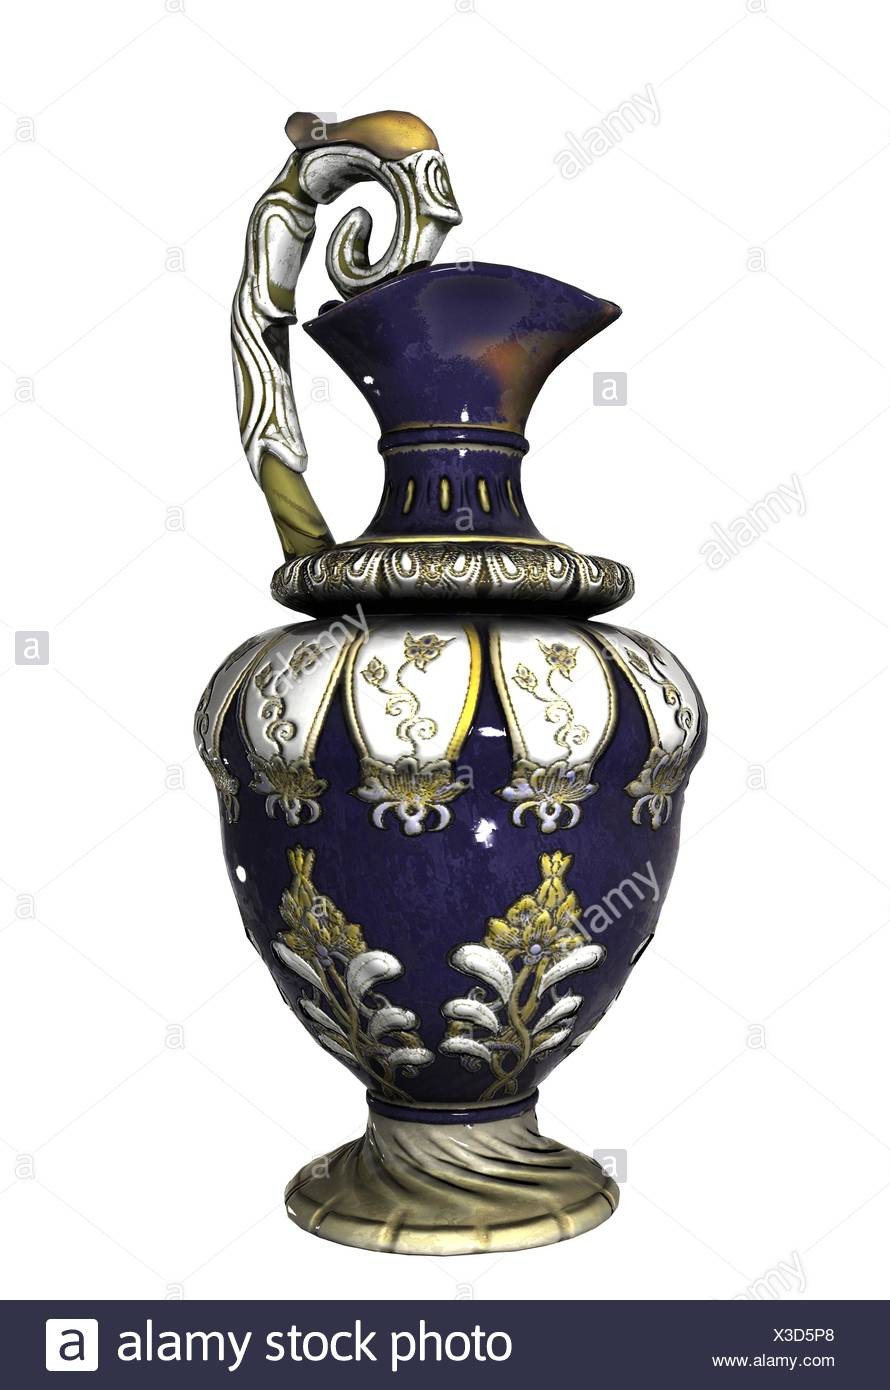 13 Cute Qianlong Emperor Vase 2024 free download qianlong emperor vase of blue chinese ceramic stock photos blue chinese ceramic stock with ornate chinese ceramic or porcelain vase with decorative flower patterns isolated against a white